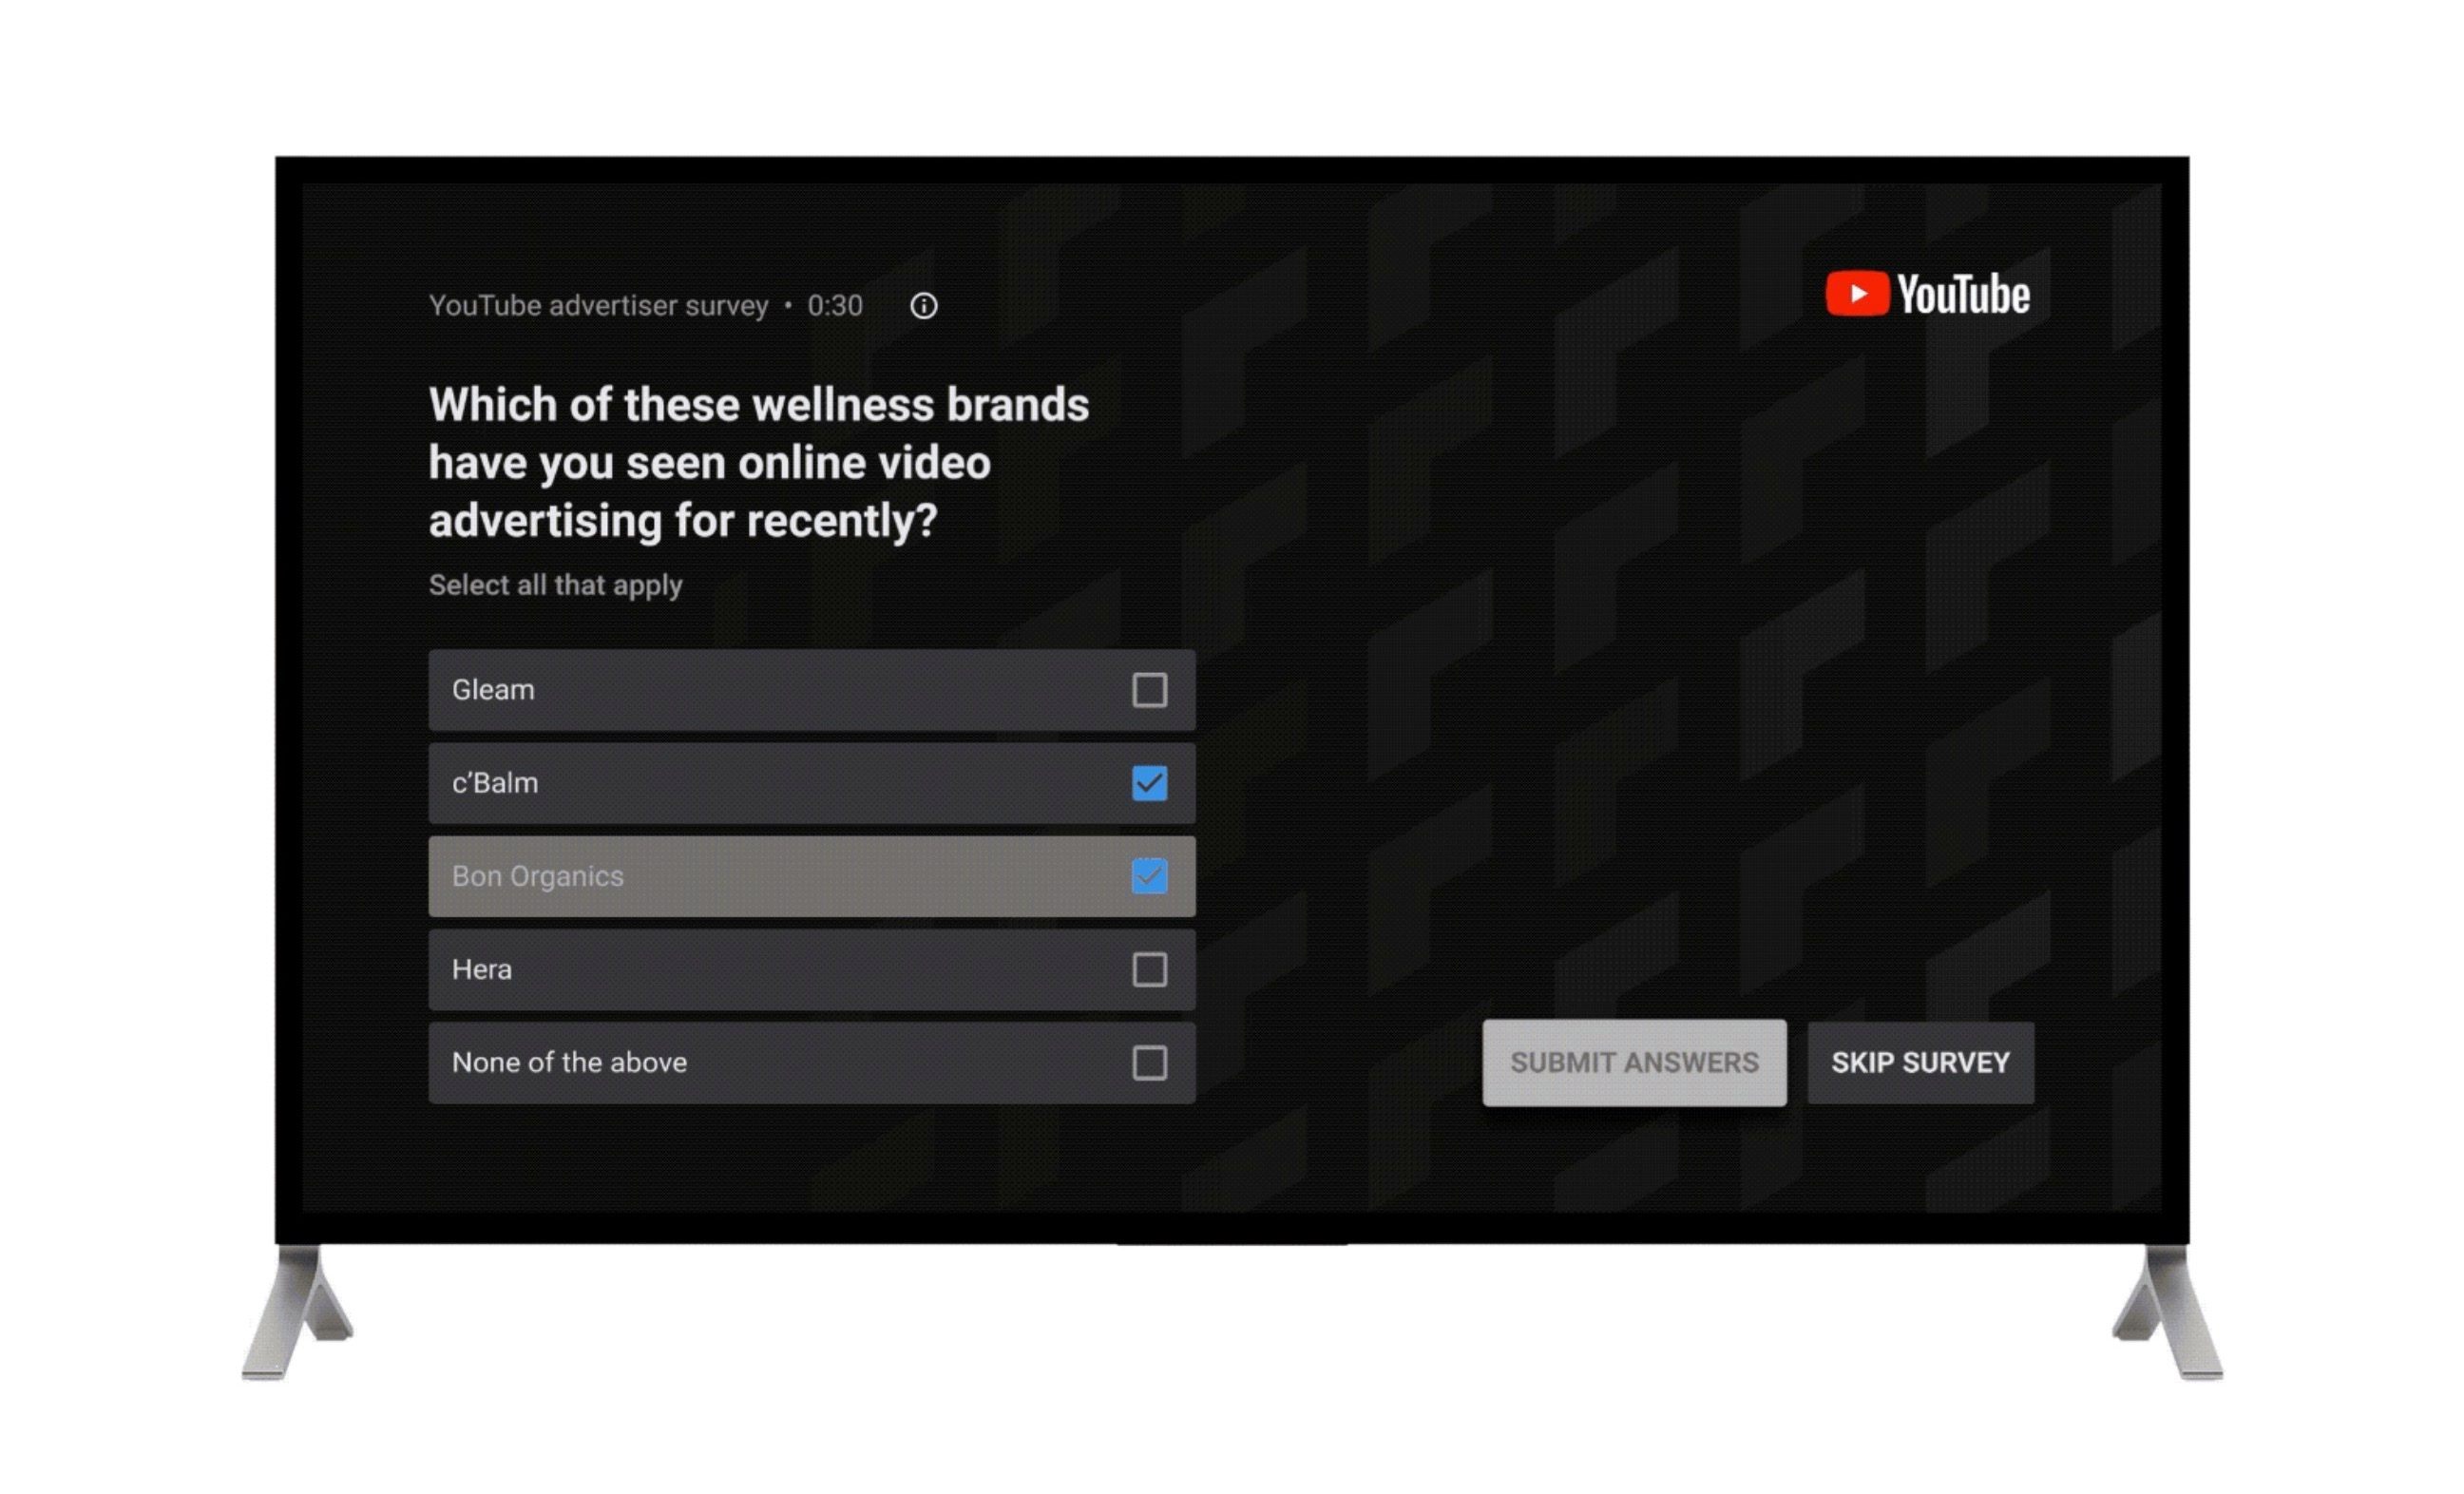 YouTube is Adding Survey Ads to Your TV Screen